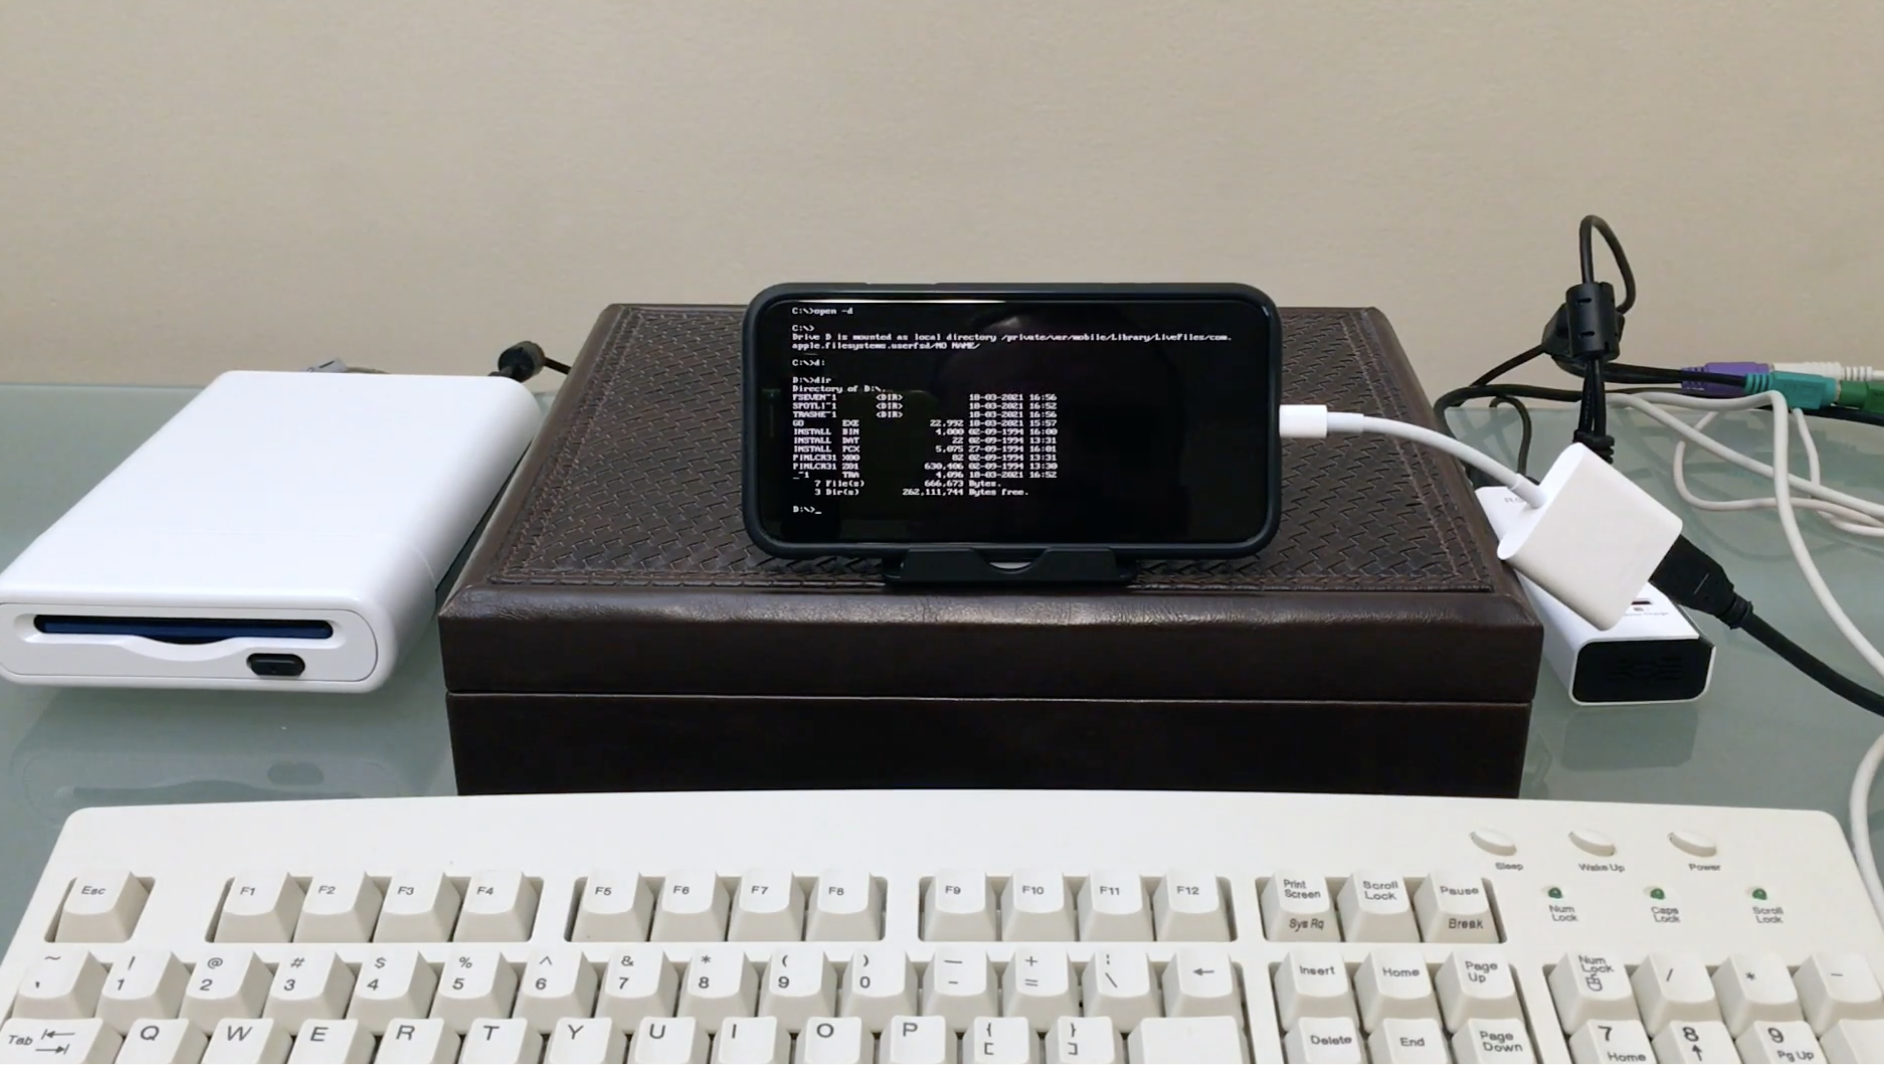 iDOS Running DOS on an iPhone